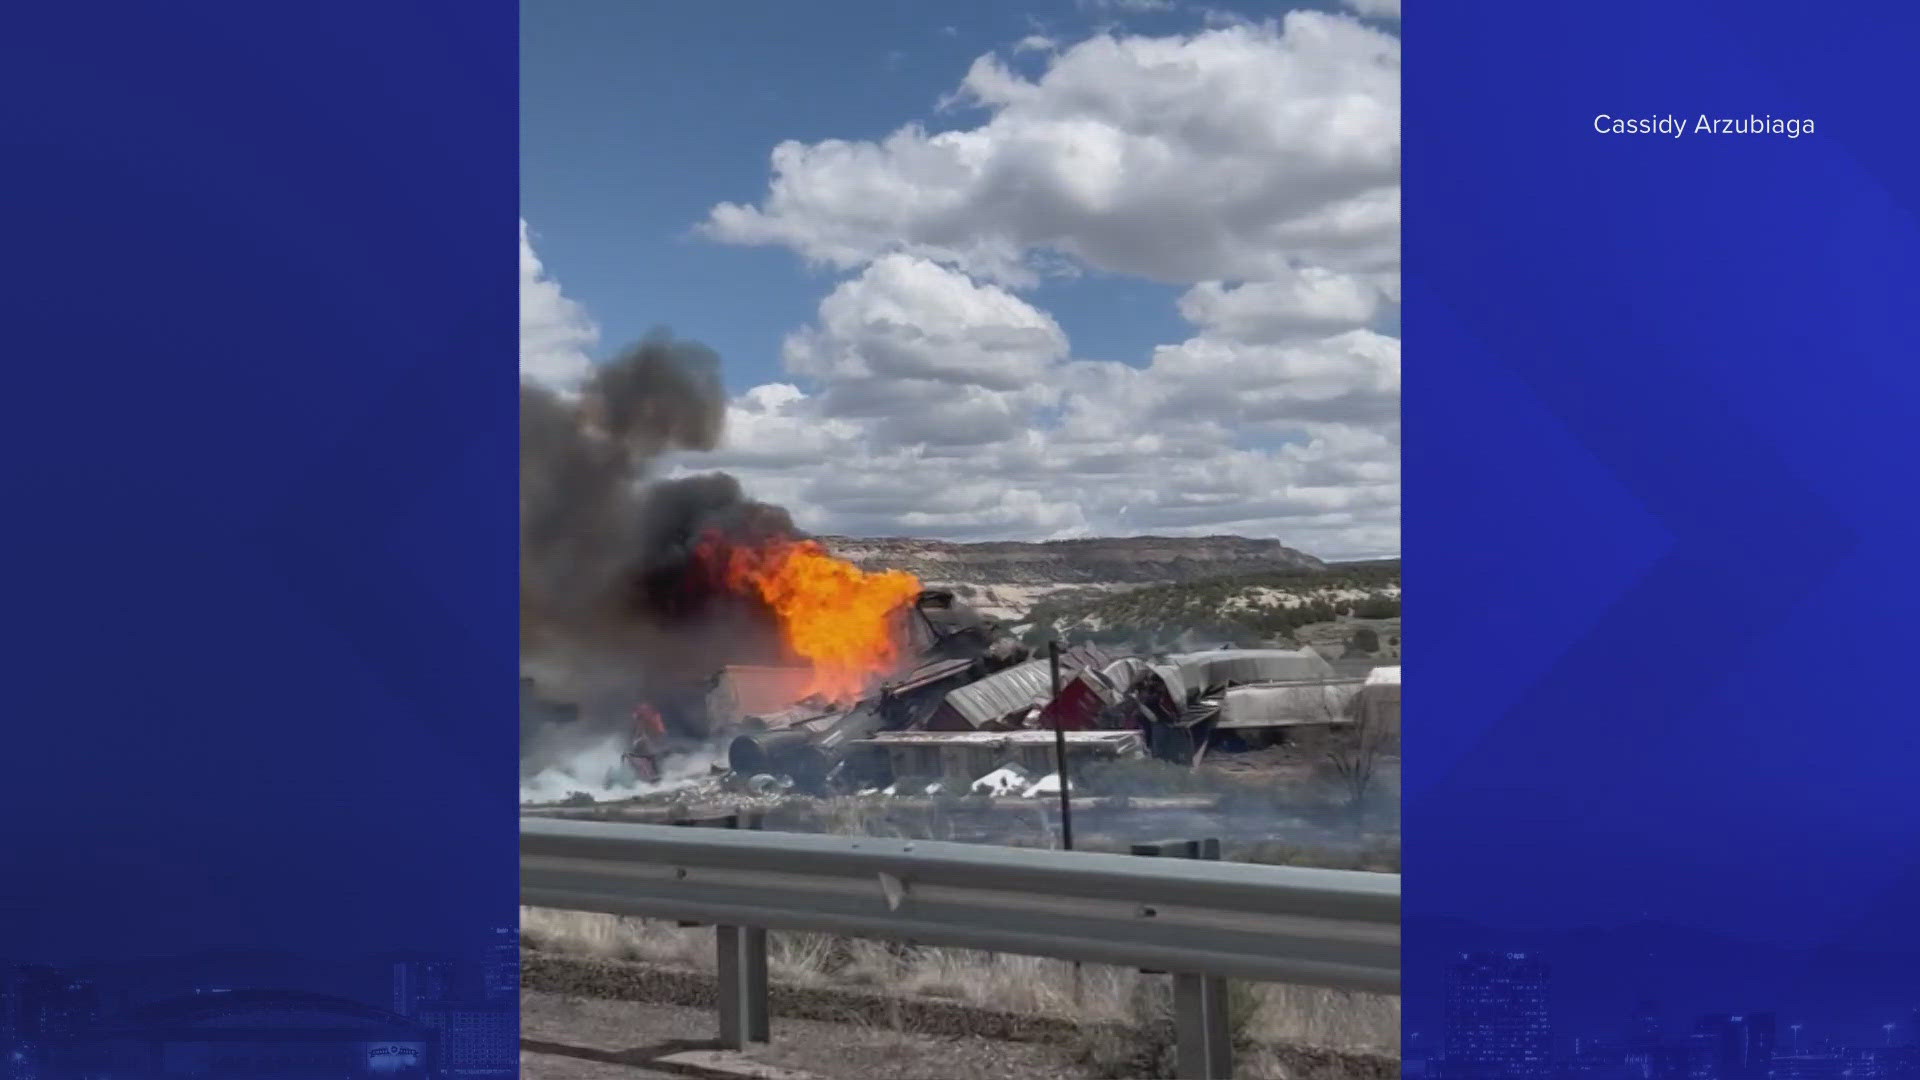 35 BNSF rail cars went off the tracks near the Arizona-New Mexico border on Friday, leading to a major freeway being closed. Watch the video above for more details.